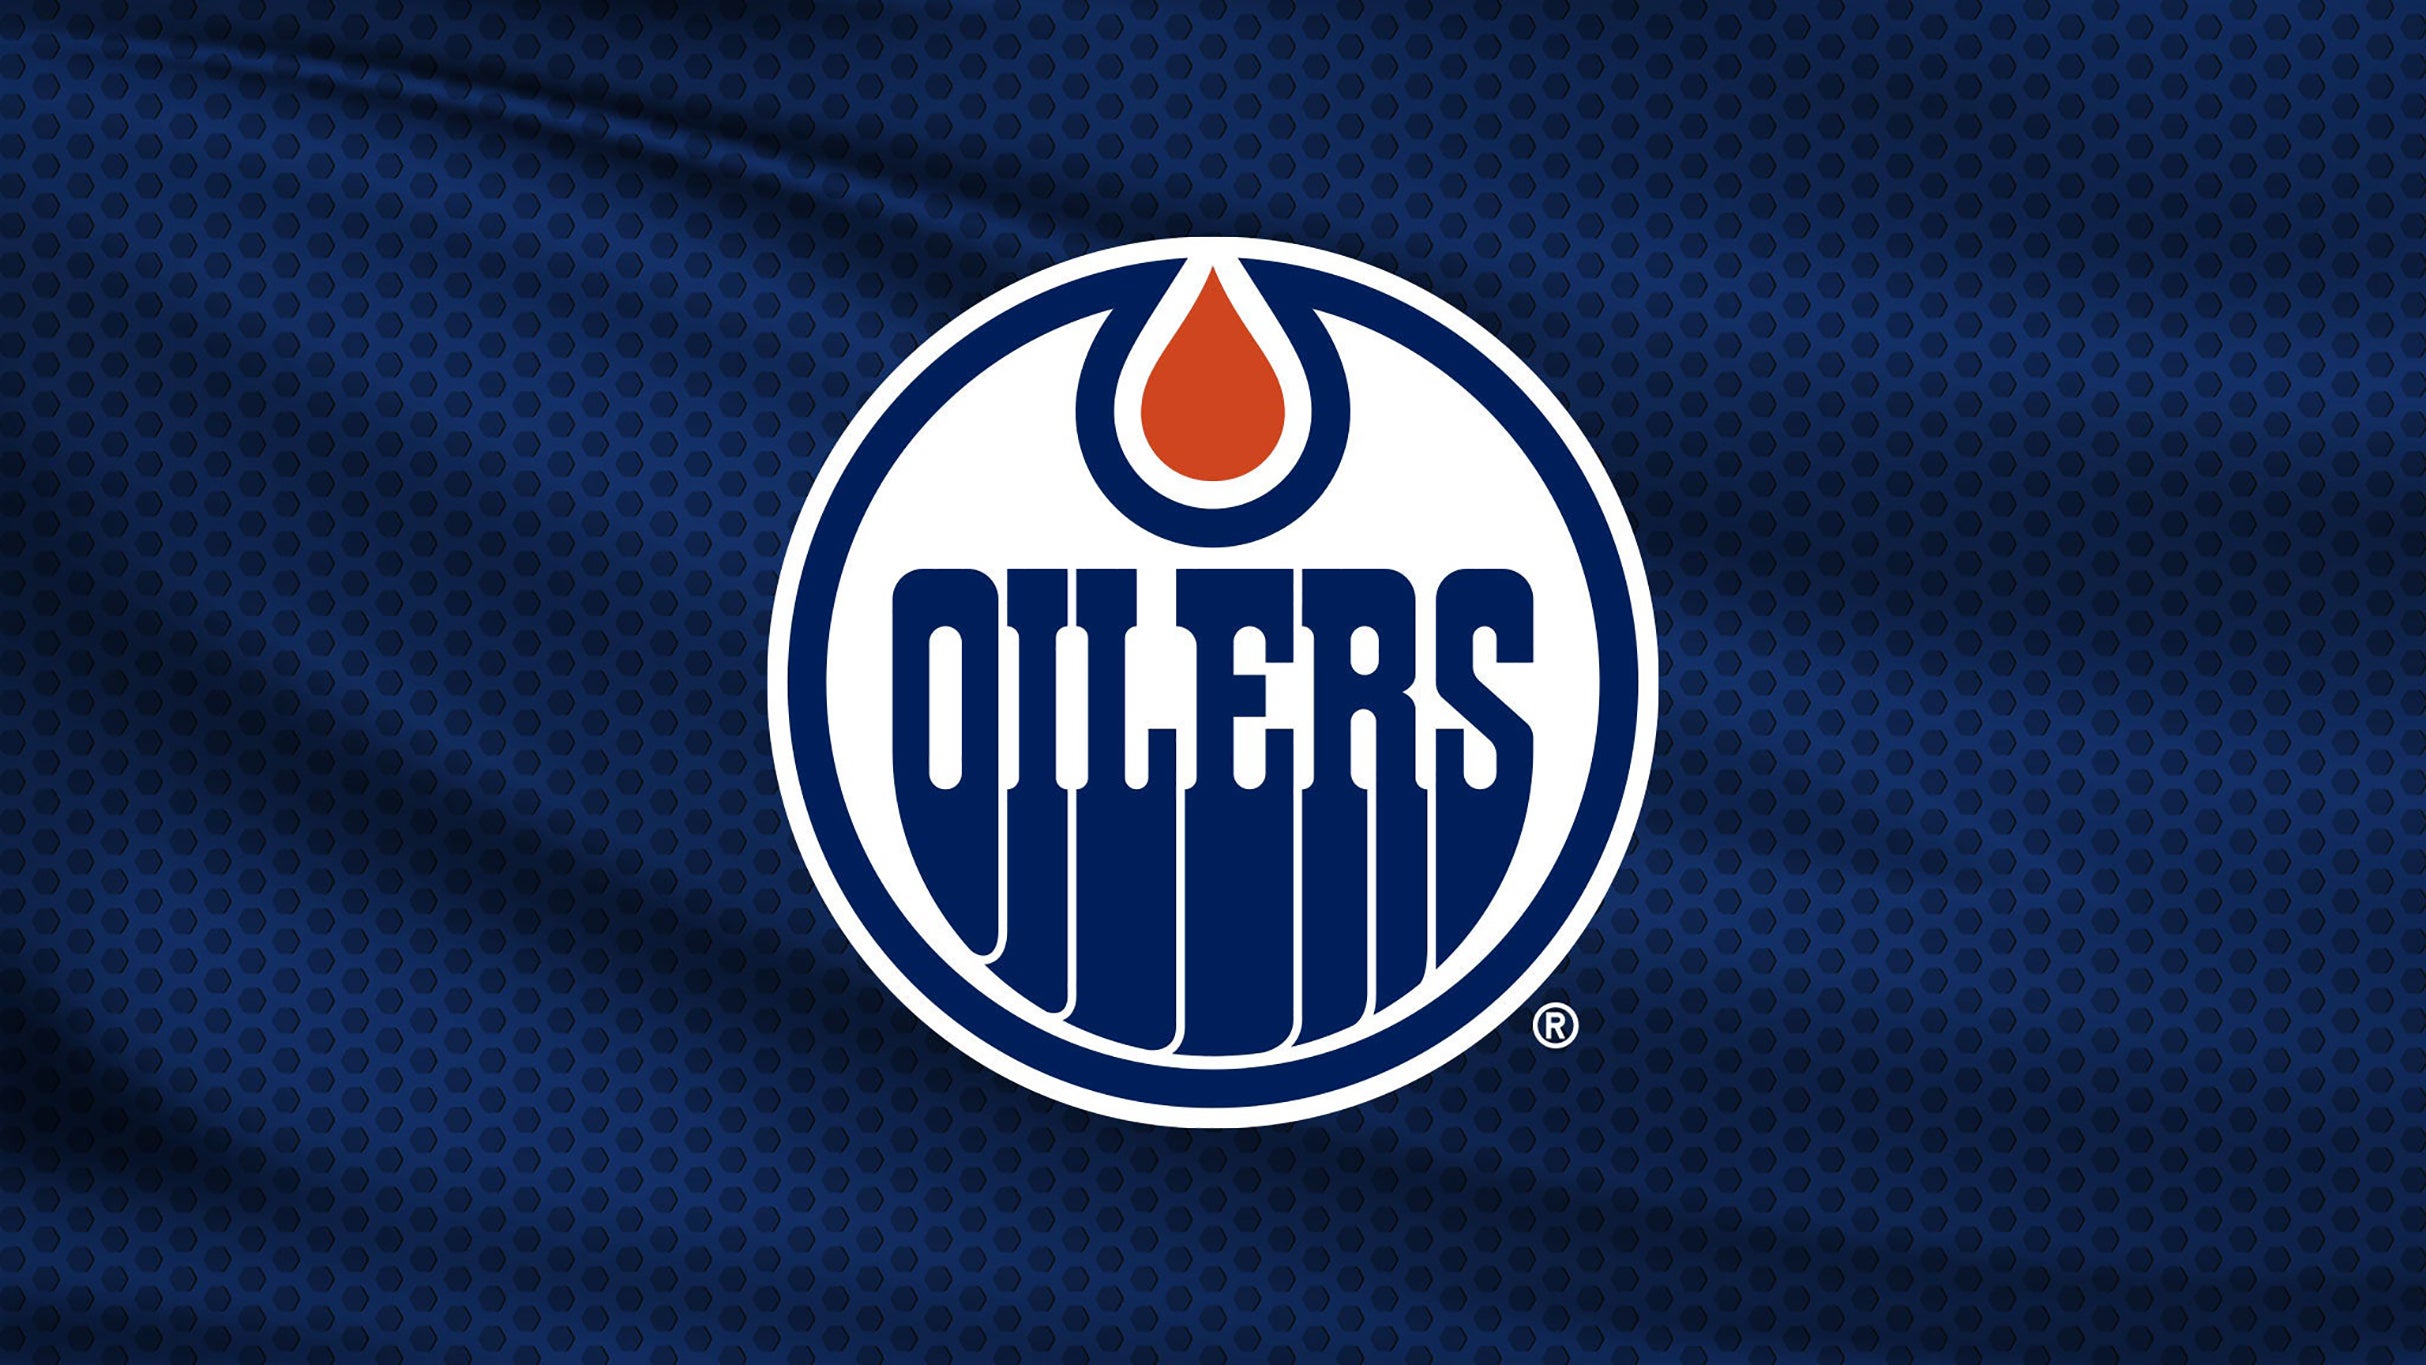 NHL Playoffs Round 2 Home Game 1: Oilers v. Canucks (In Edmonton) in Edmonton promo photo for Exclusive presale offer code